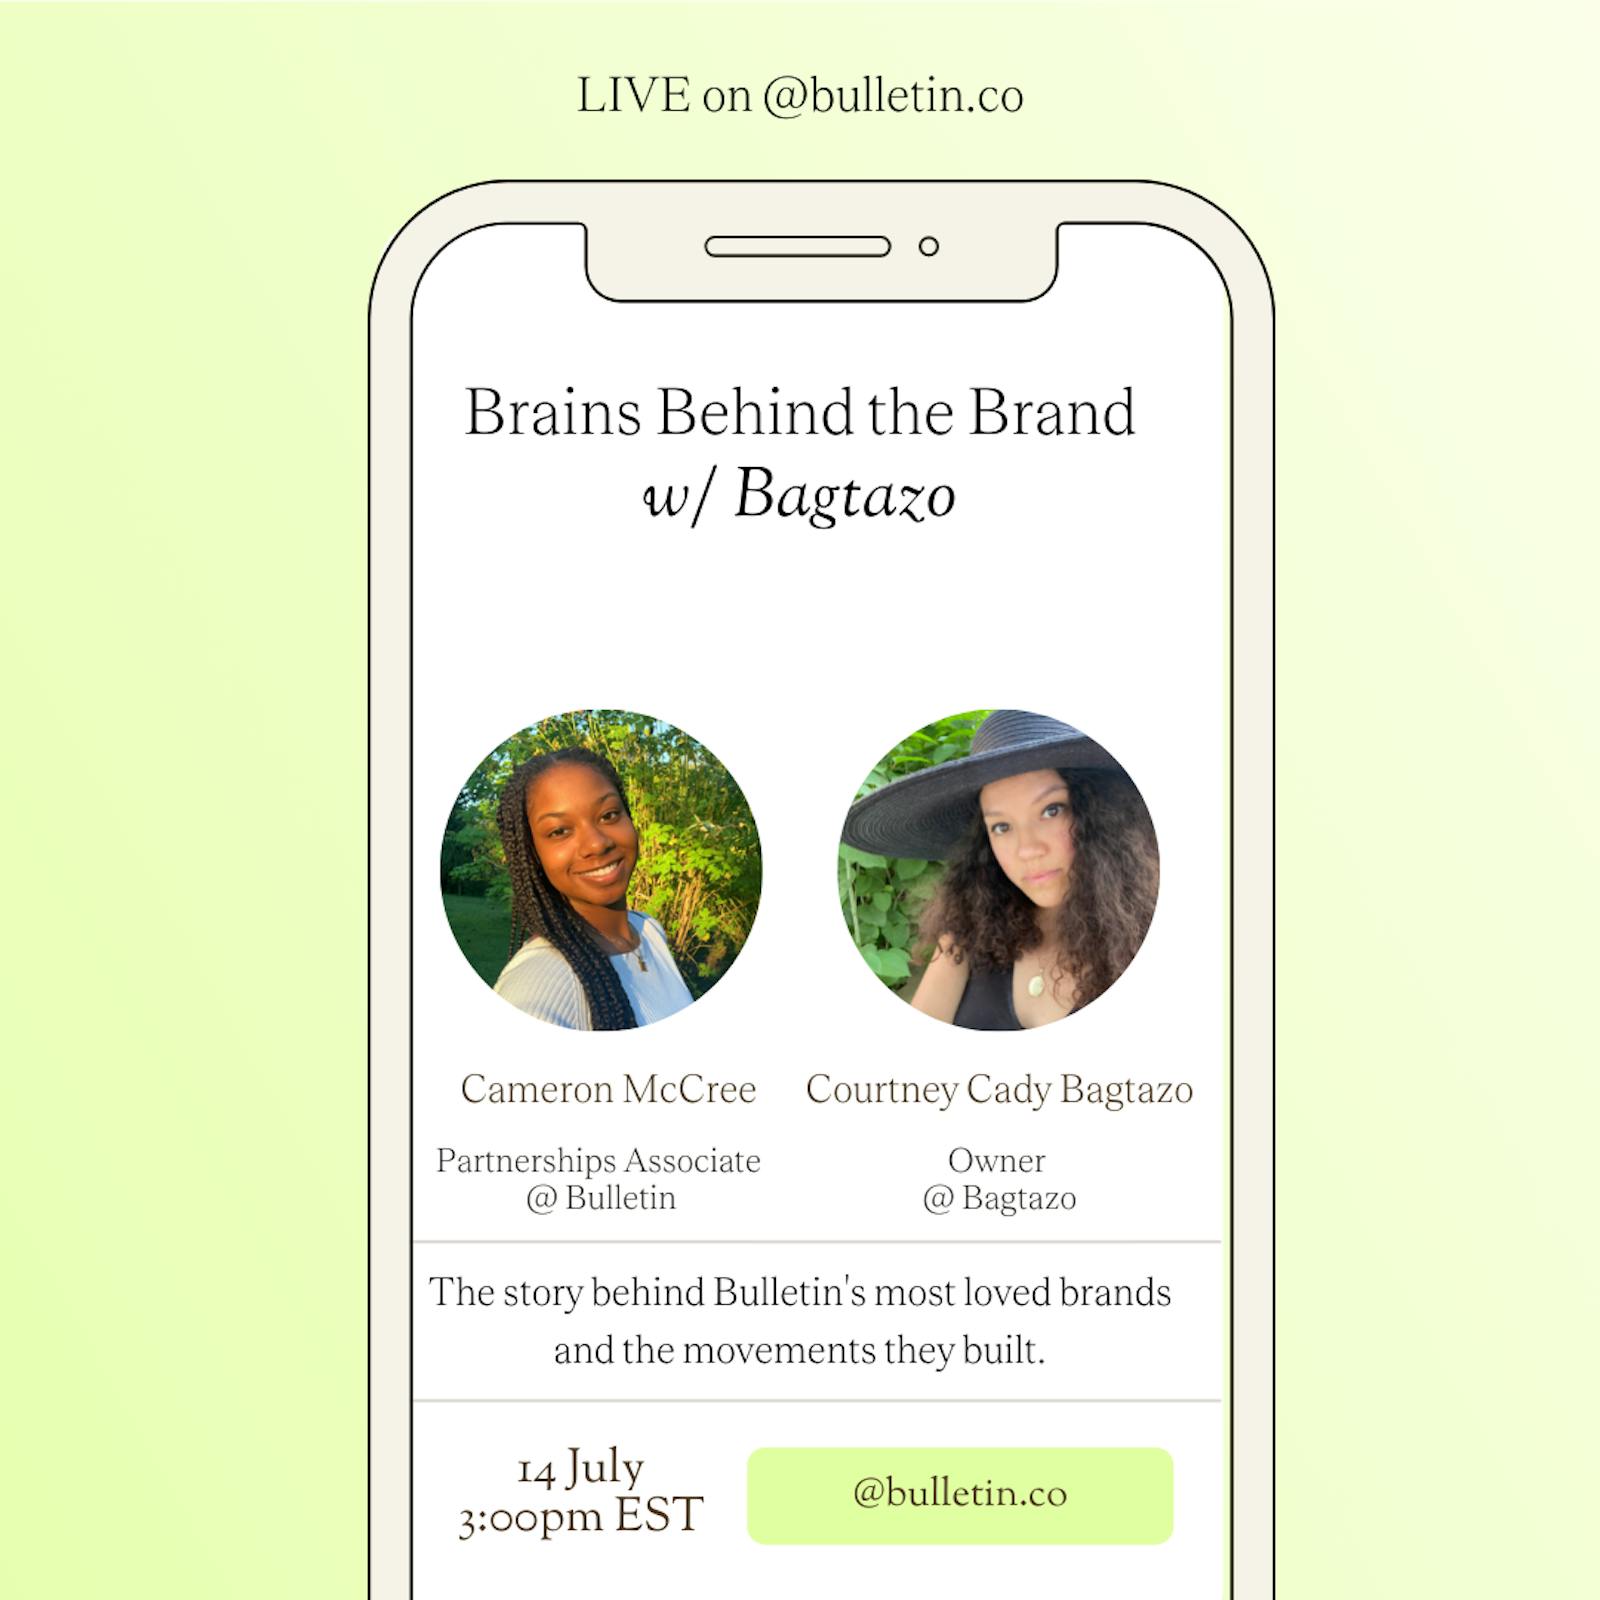 Brains Behind the Brand with @bagtazo